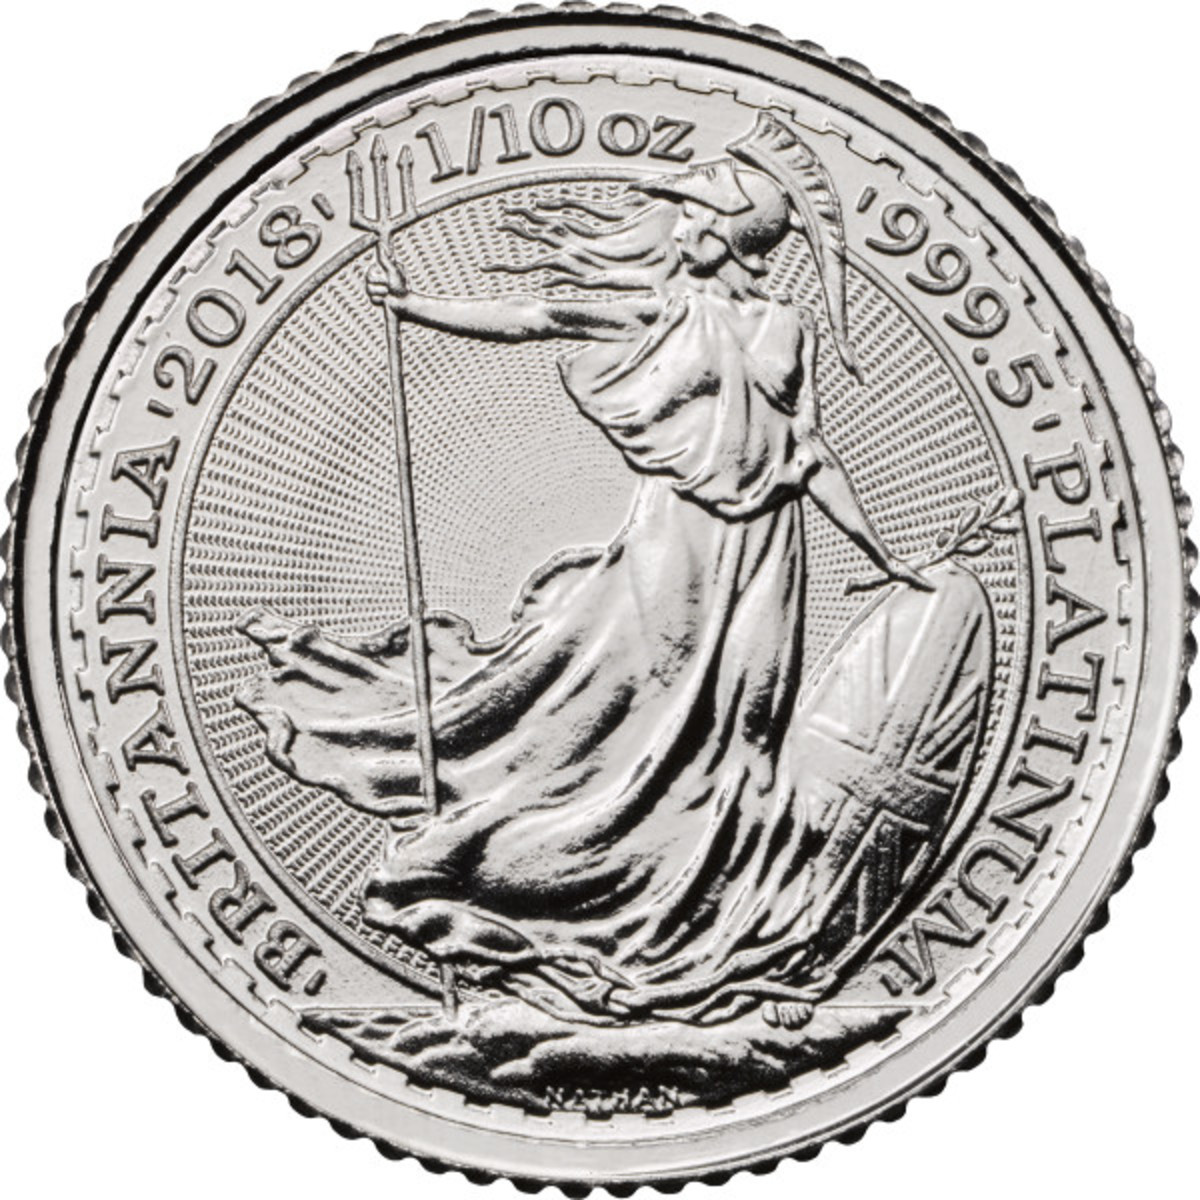 Great Britain has sold about 35,000 ounces of its recent platinum composition coins into the U.S. market.